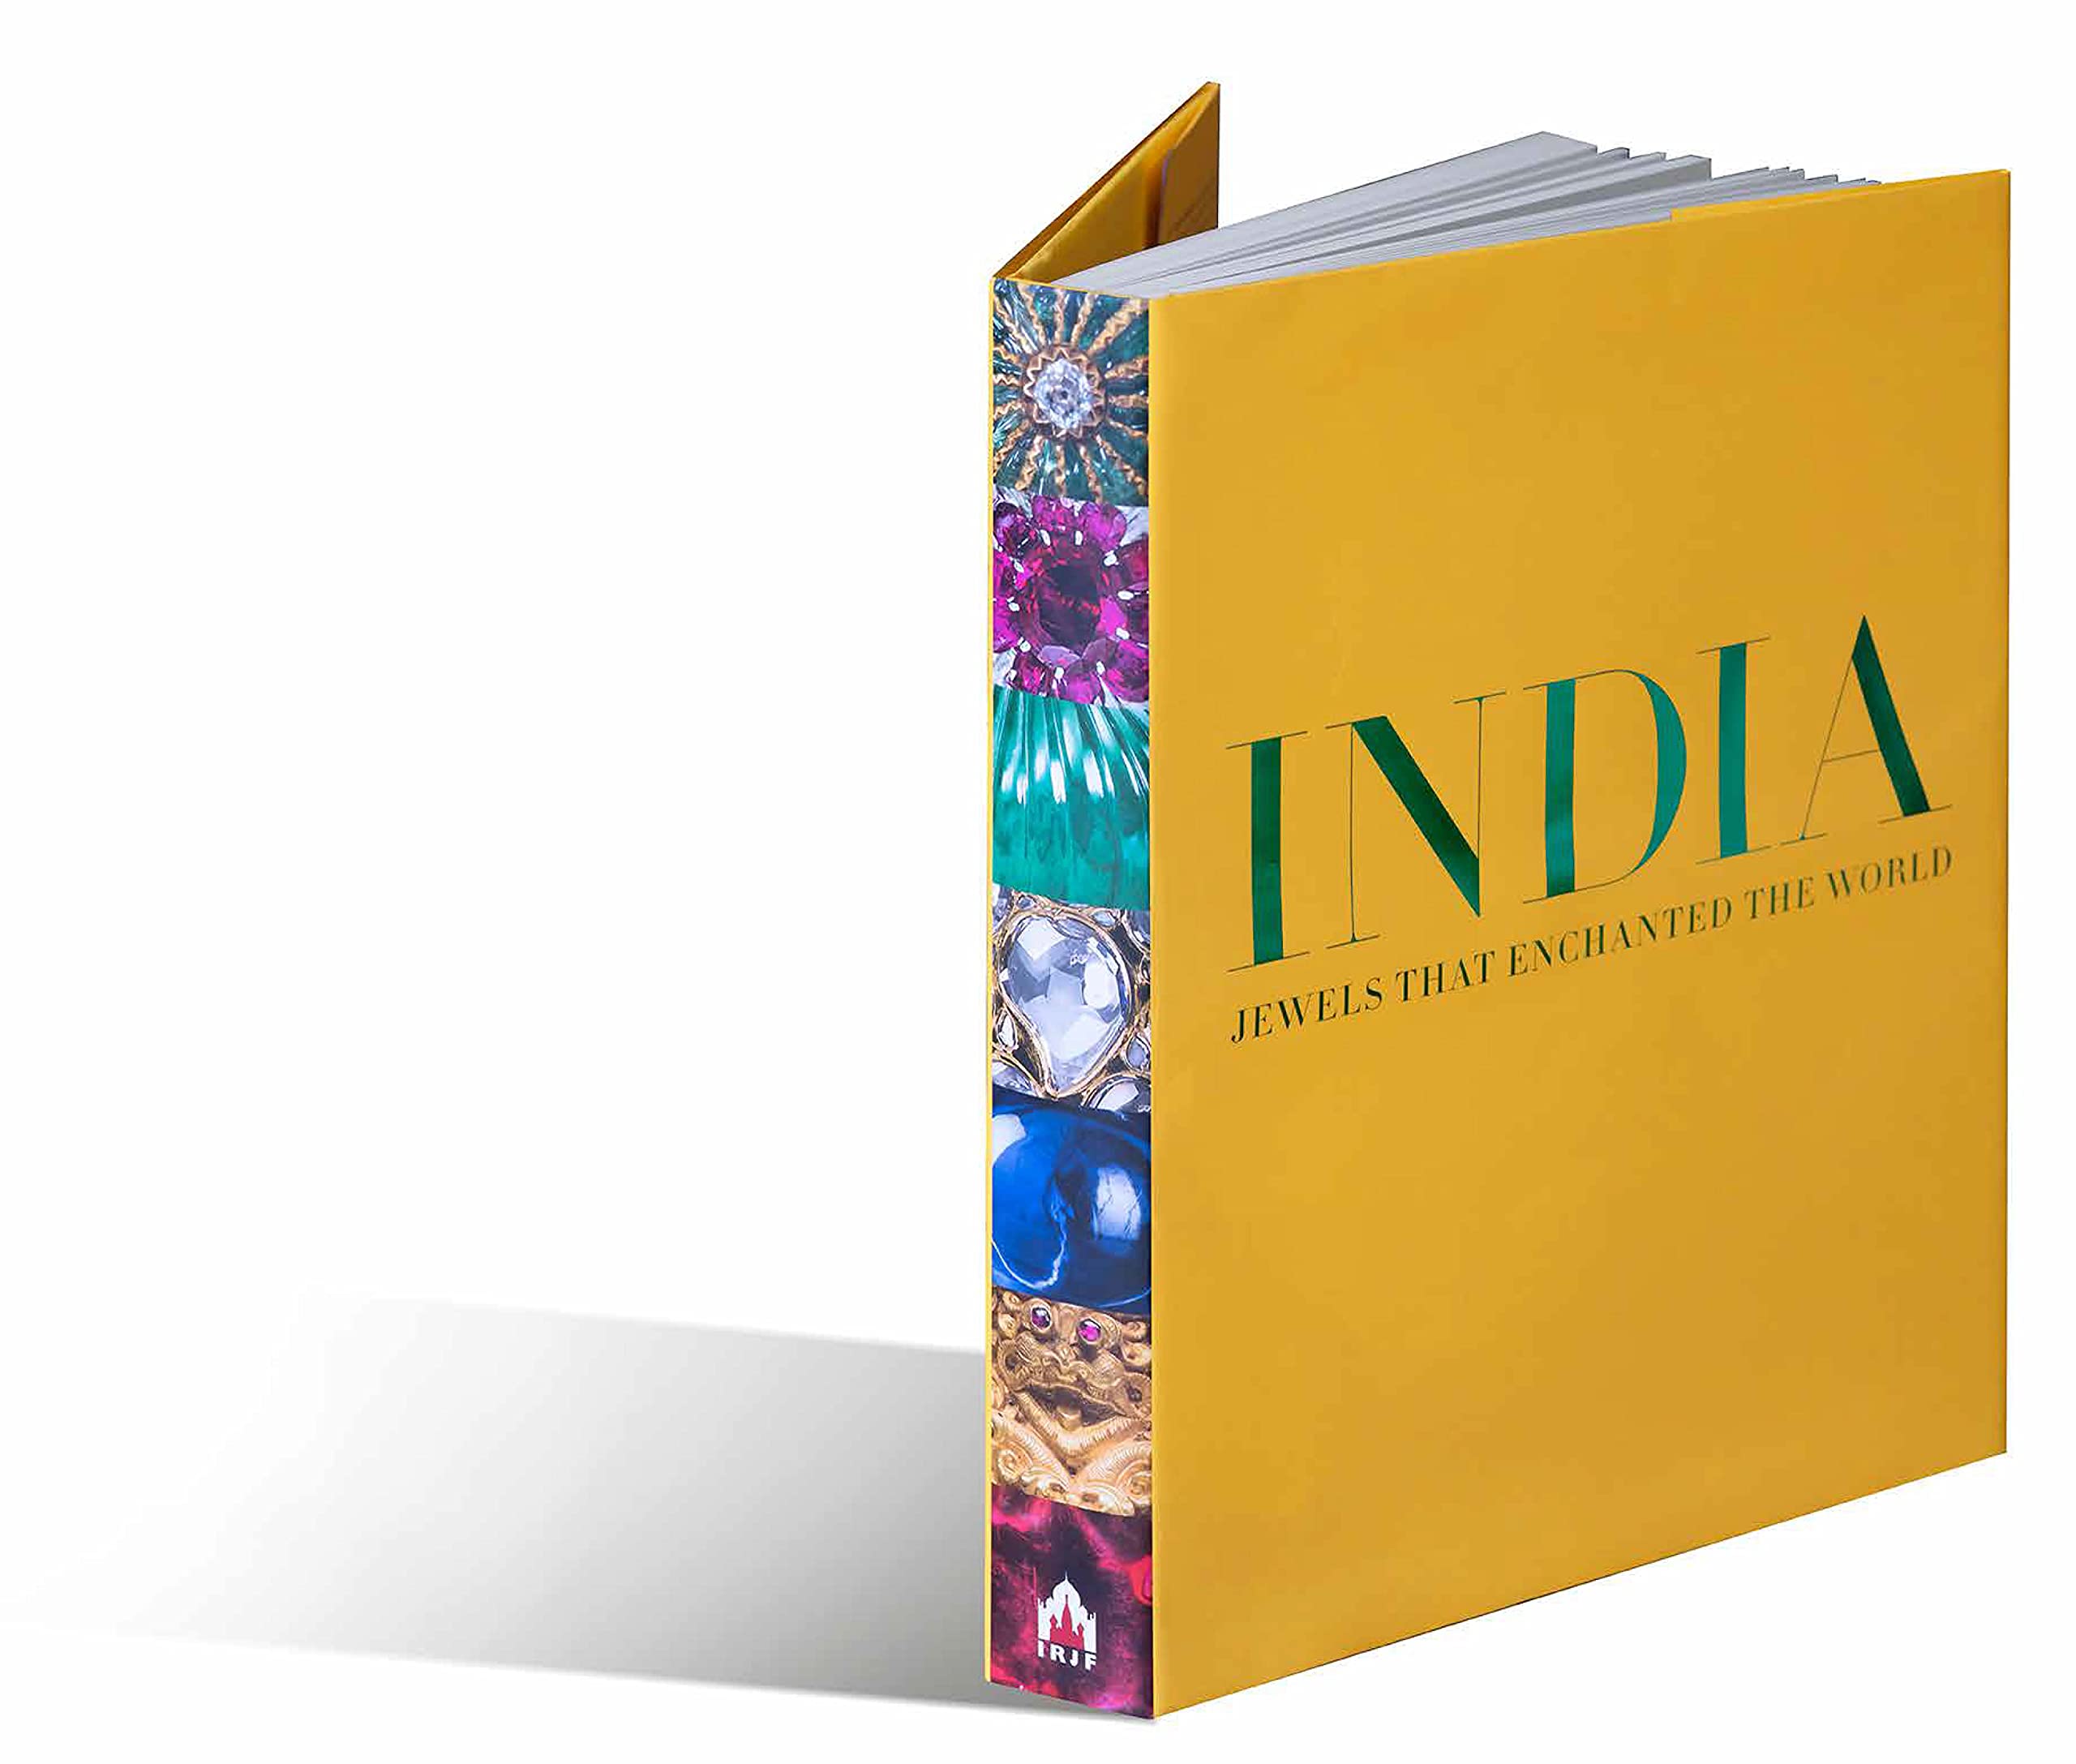 India, Jewels that Enchanted the World explore the world discoveries that shaped our world